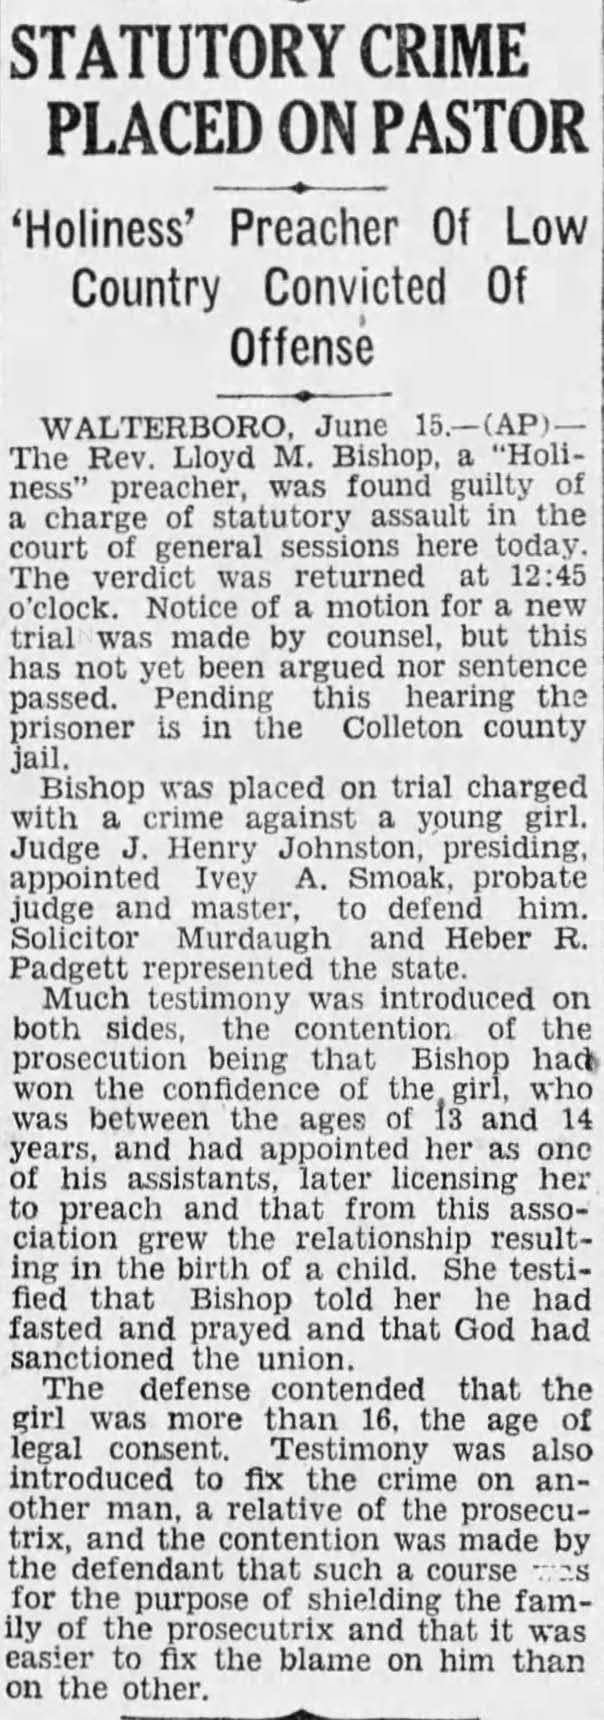 Before the Fall: Article on preacher found guilty of statutory criminal assault in 1927.